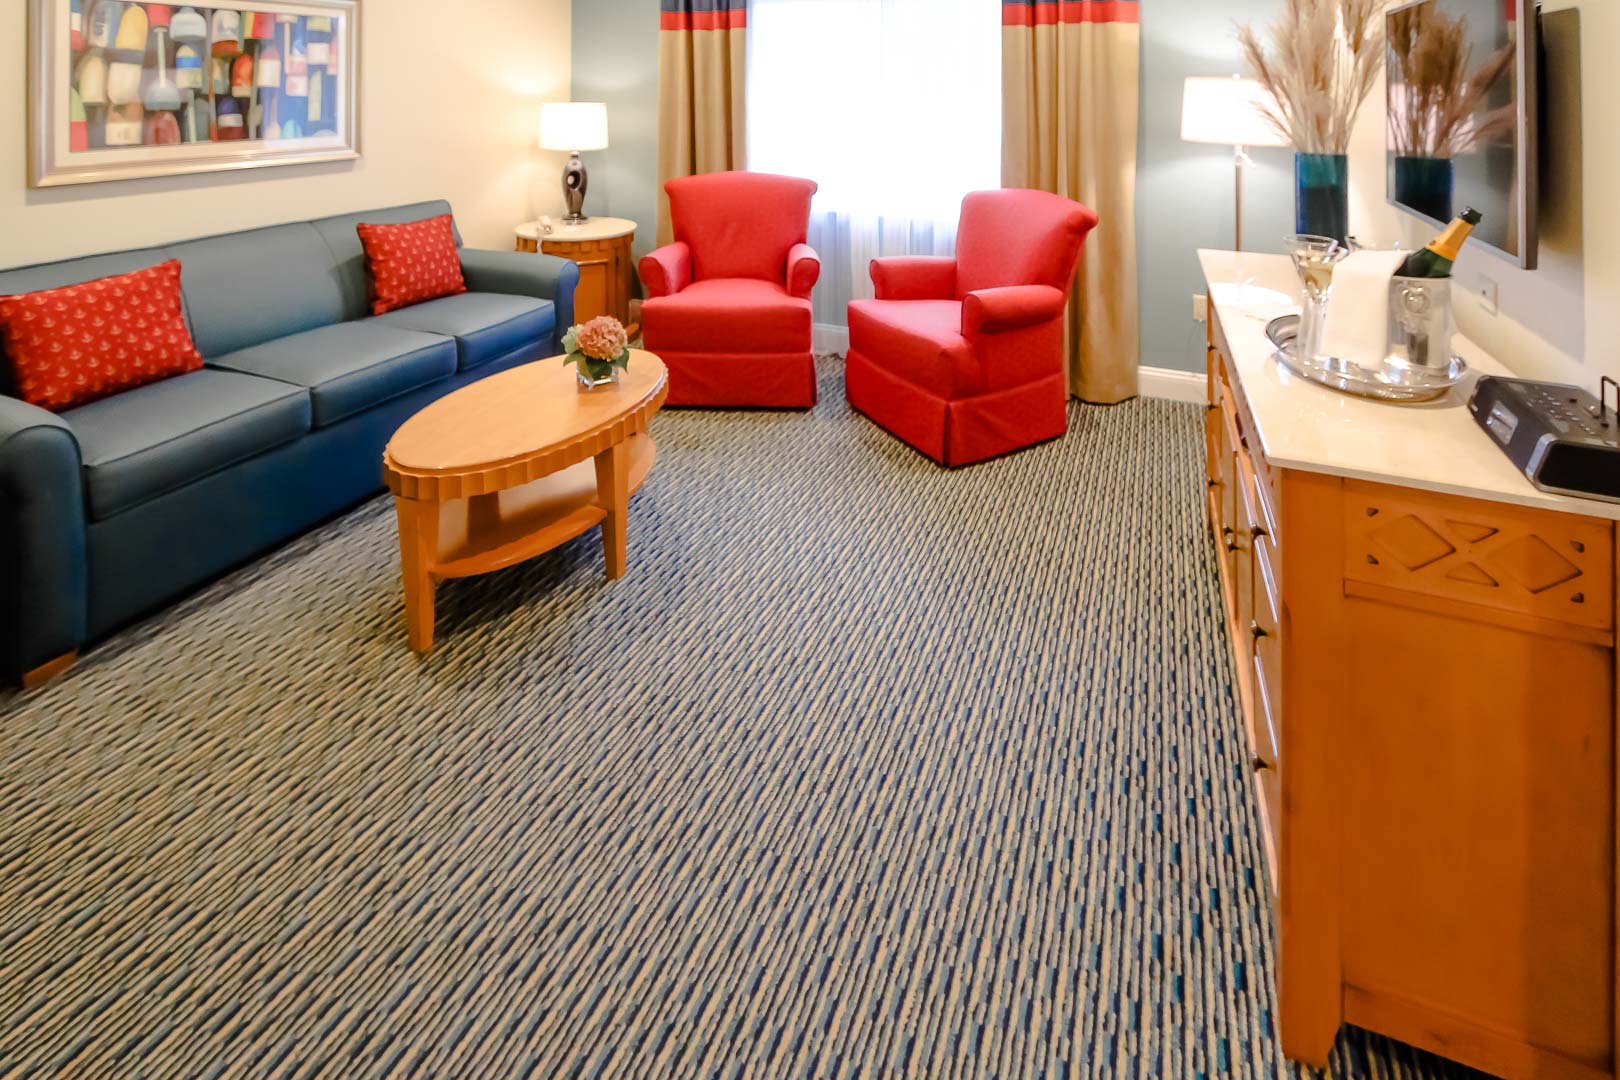 A vibrant living room area at VRI's The Cove at Yarmouth in Massachusetts.